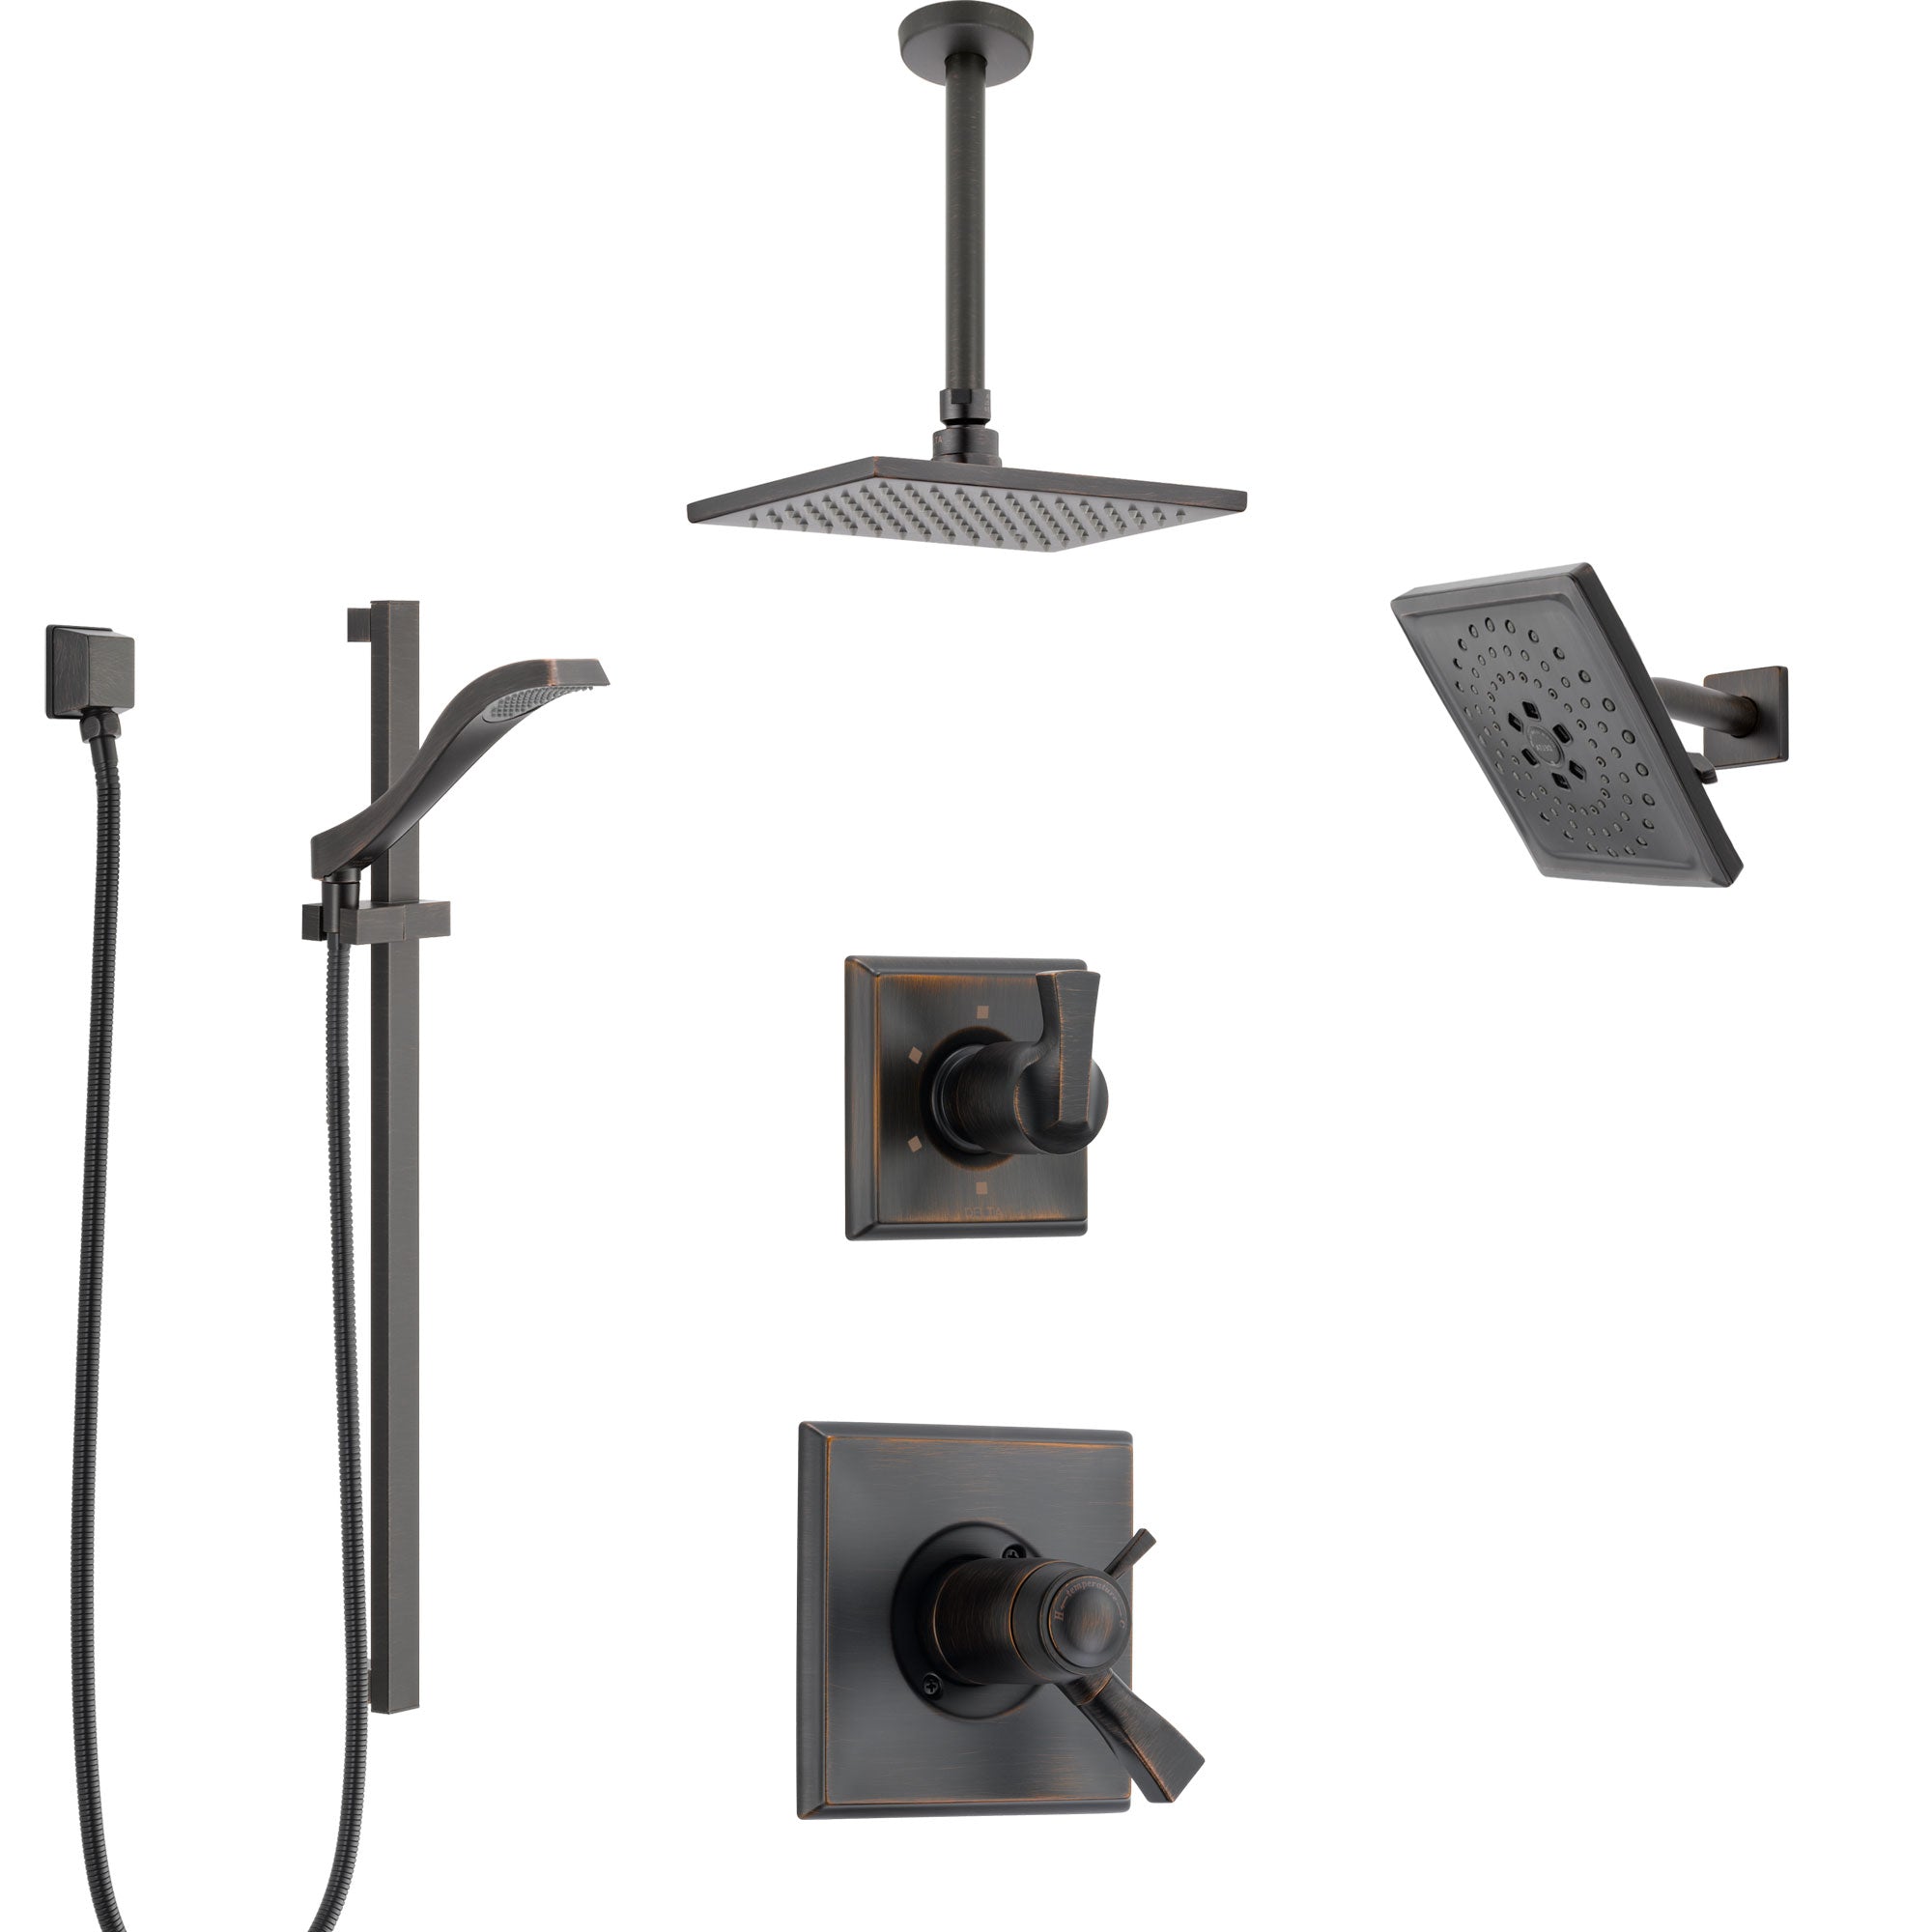 Delta Dryden Venetian Bronze Shower System with Dual Thermostatic Control, Diverter, Showerhead, Ceiling Mount Showerhead, and Hand Shower SS17T512RB6